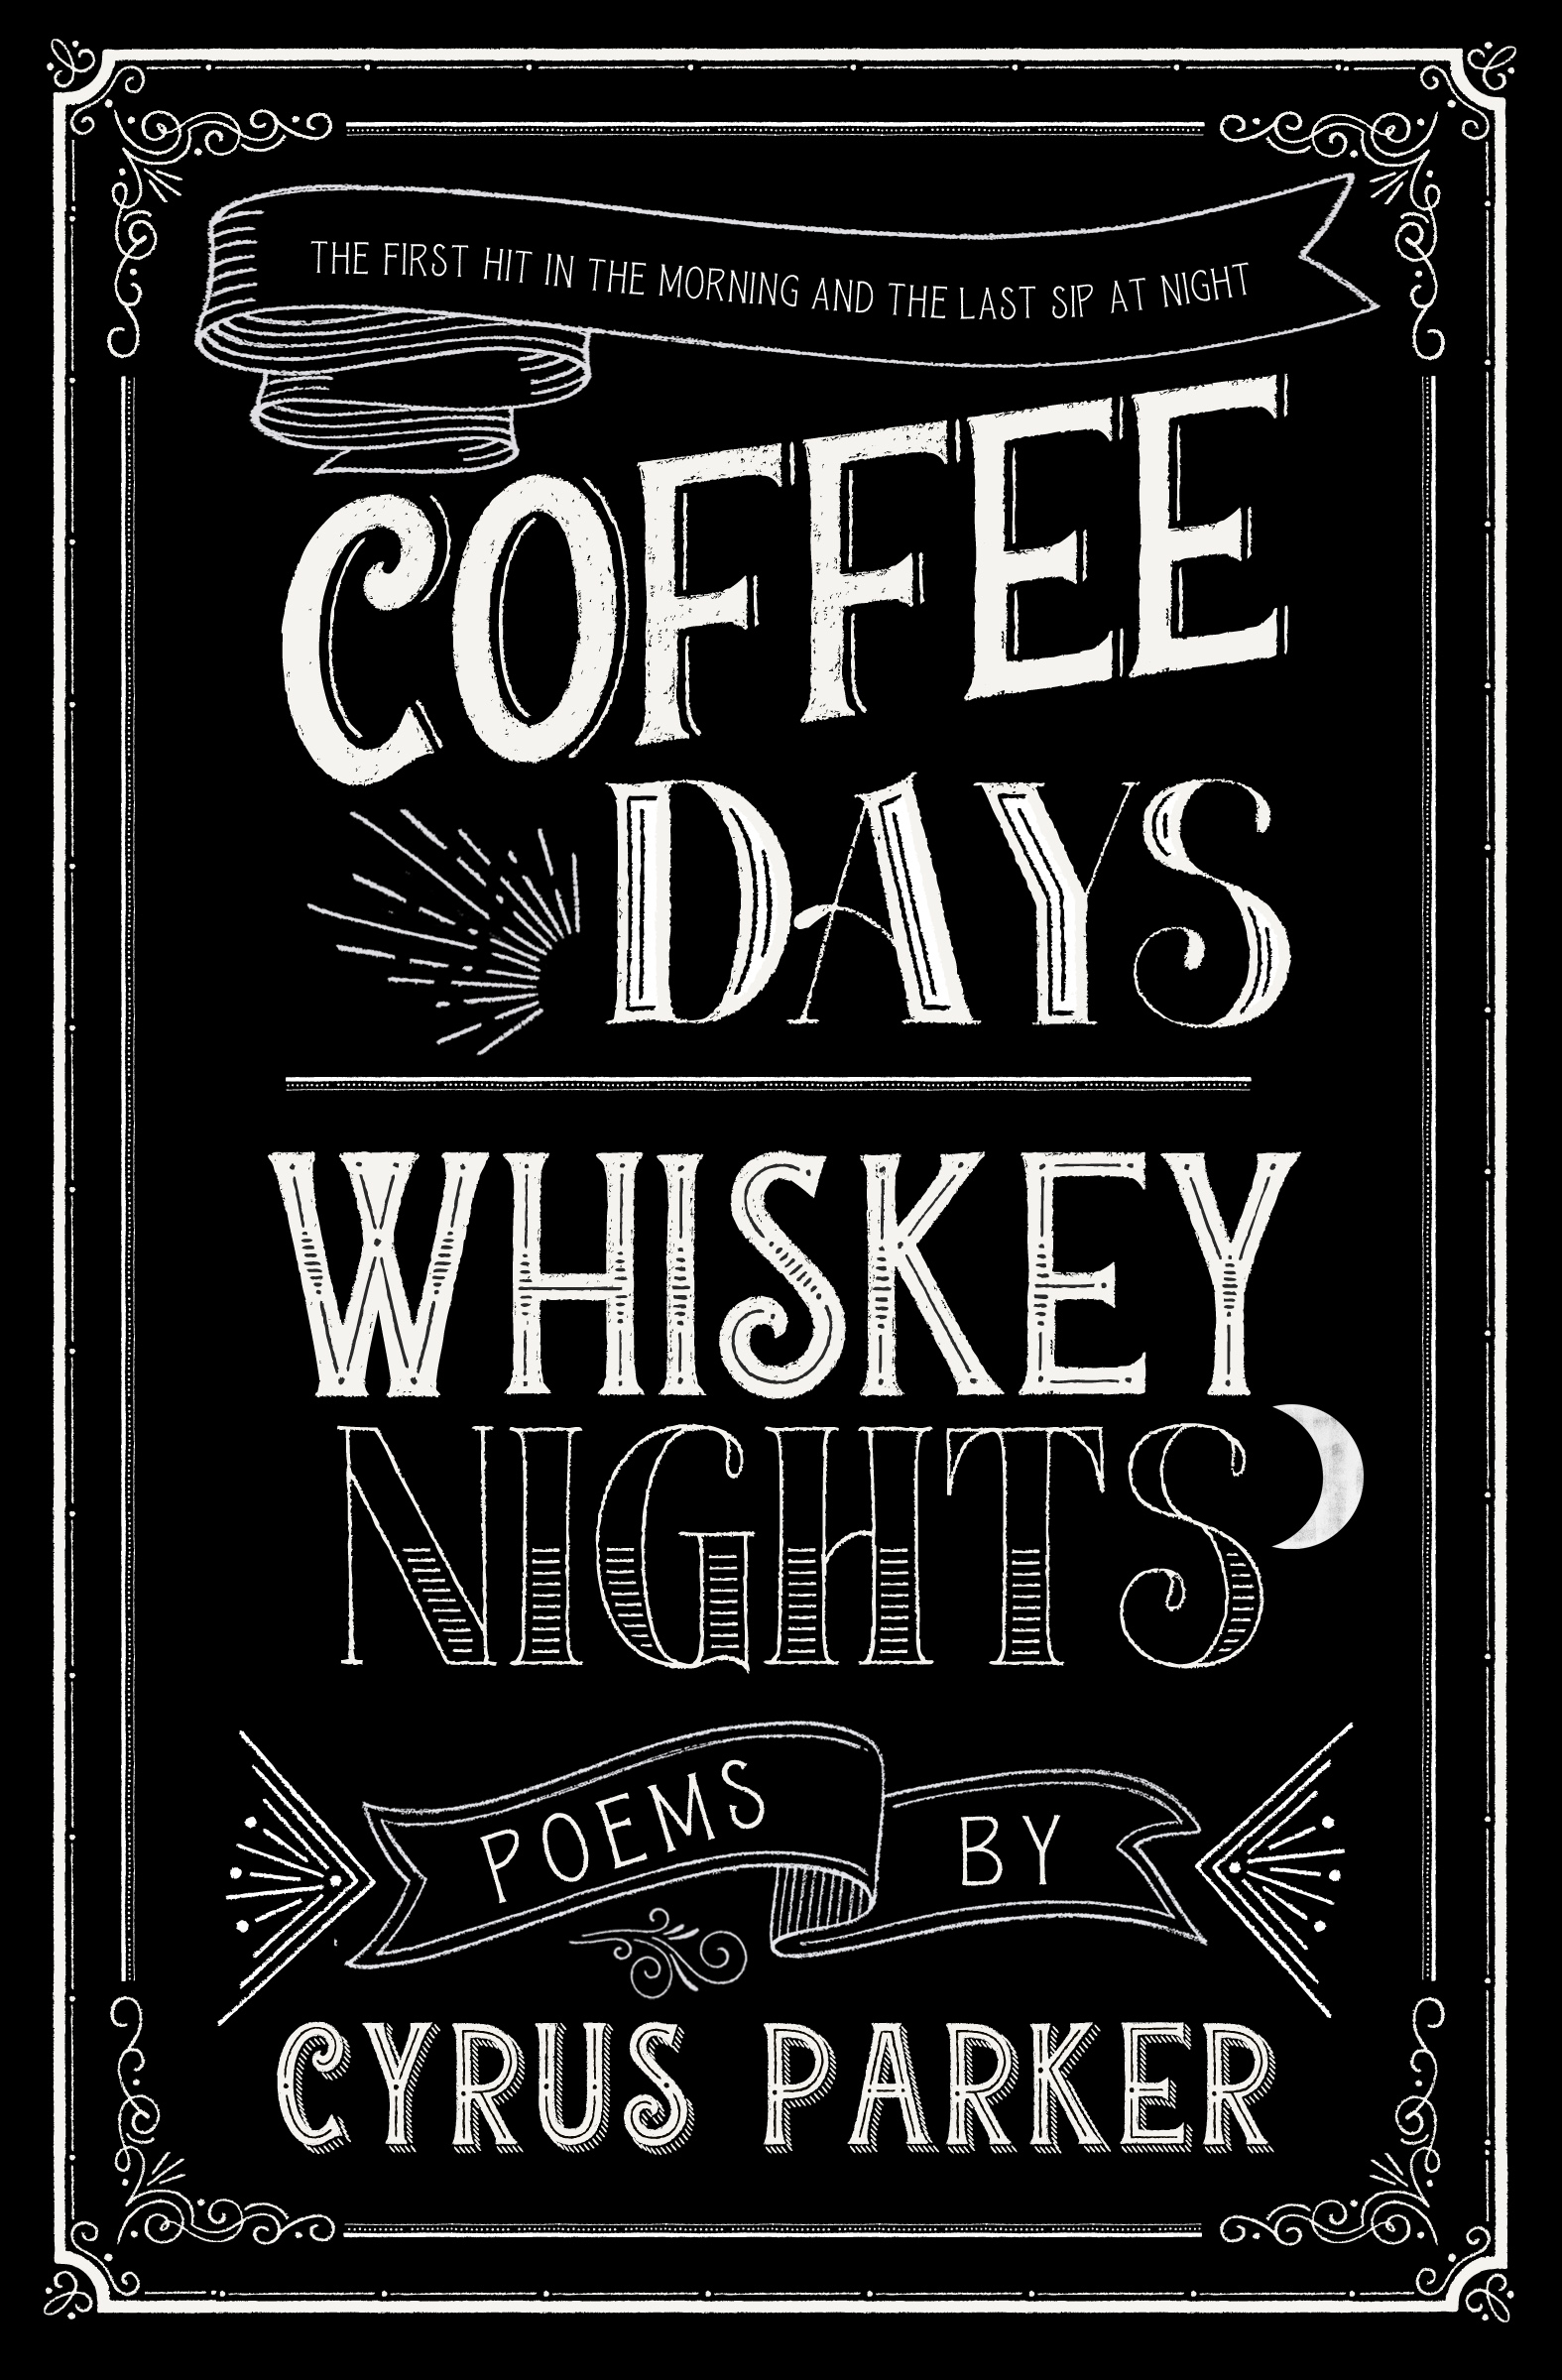 When Will Coffee Days Whiskey Nights By Cyrus Parker Release? 2020 LGBT Poetry Releases